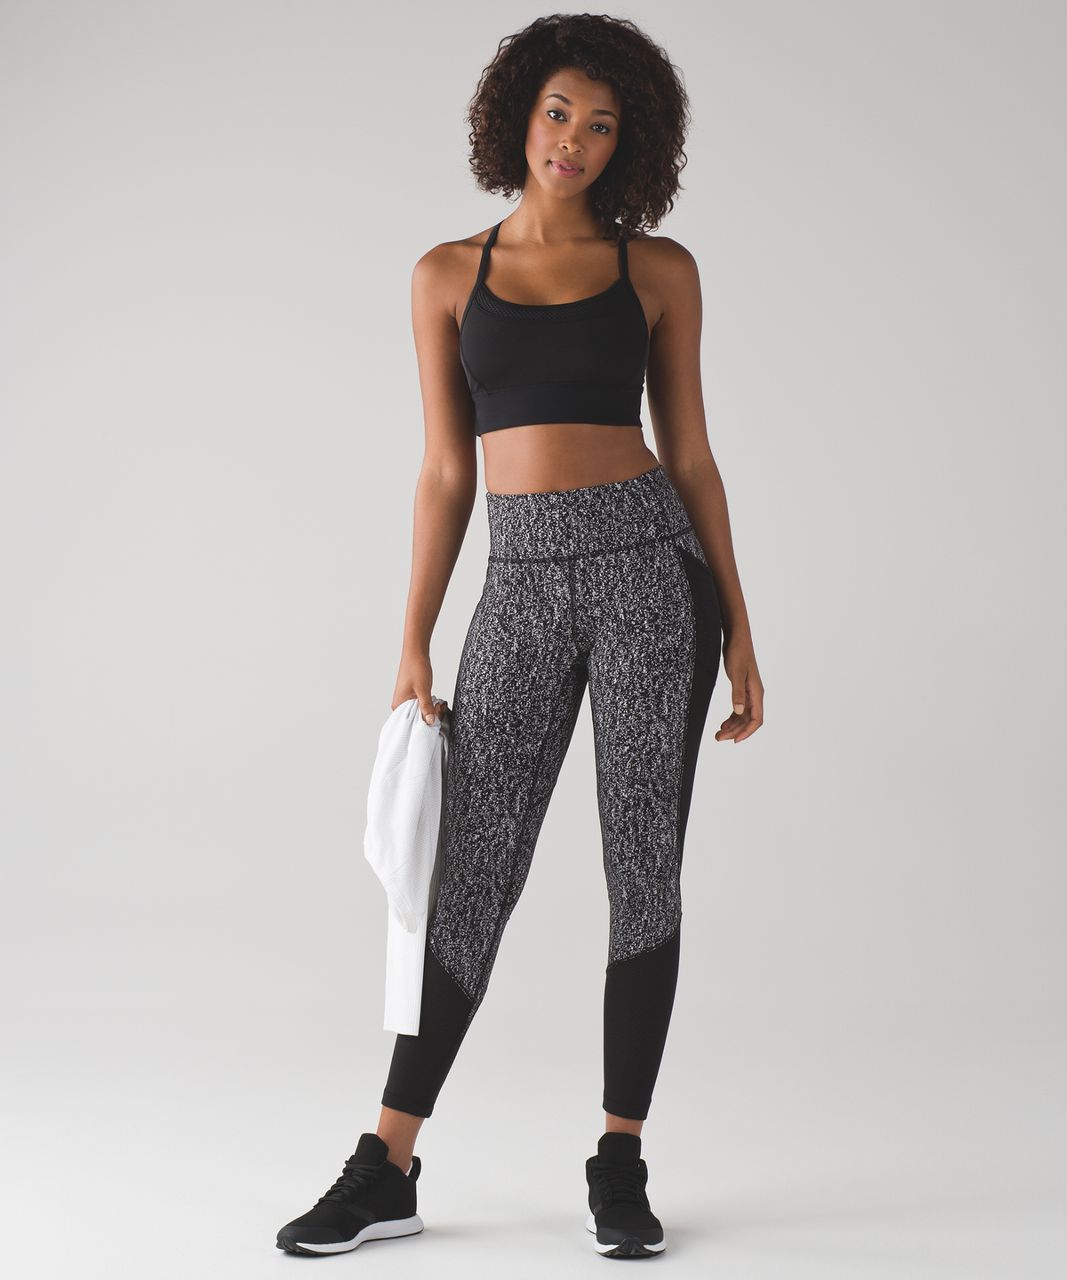 Lululemon Fit Physique Tight - Luon Suited Jacquard Black White